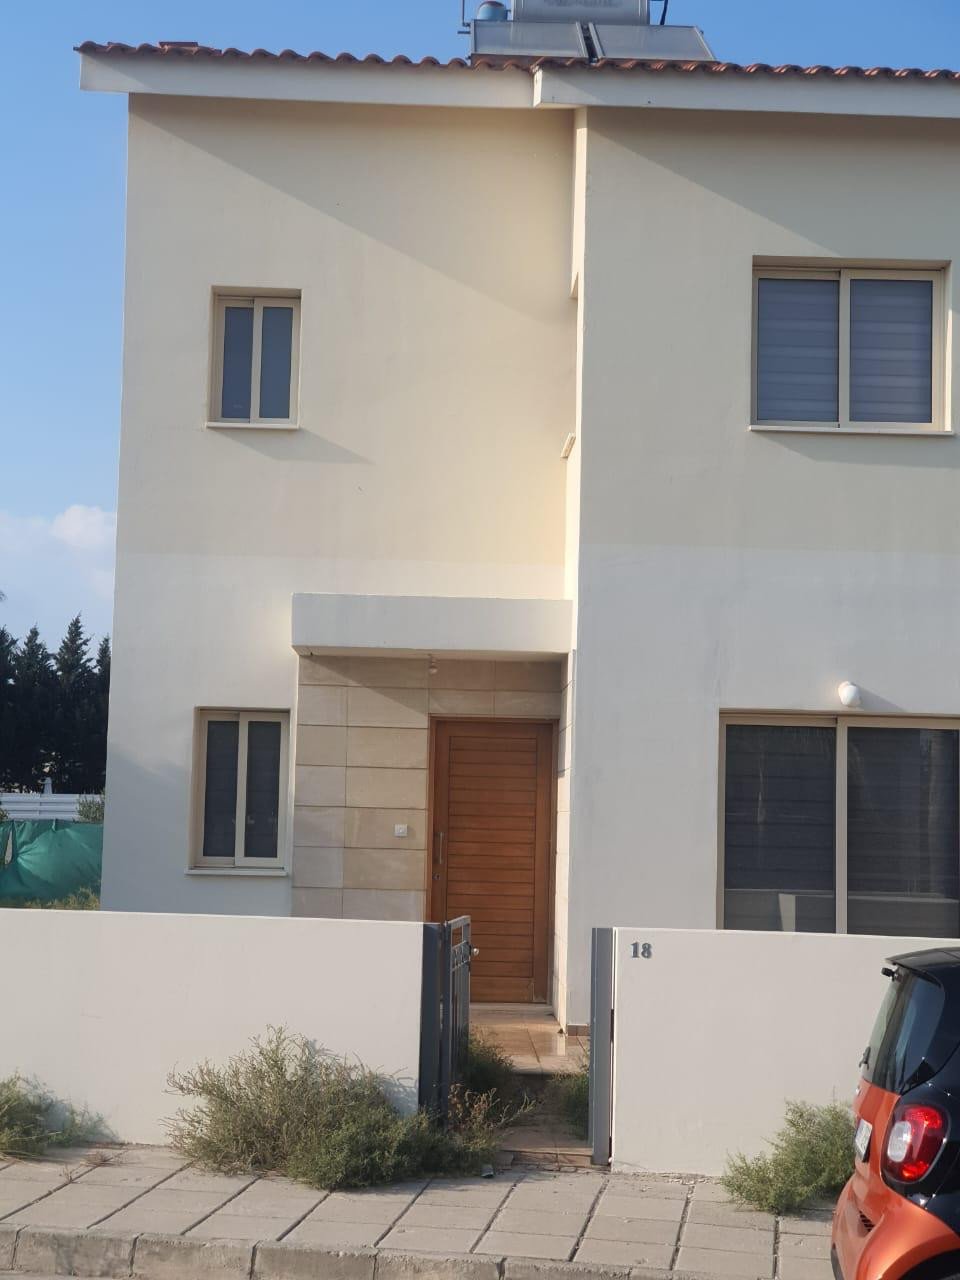 Property for Rent: House (Semi detached) in Lakatamia, Nicosia for Rent | Key Realtor Cyprus